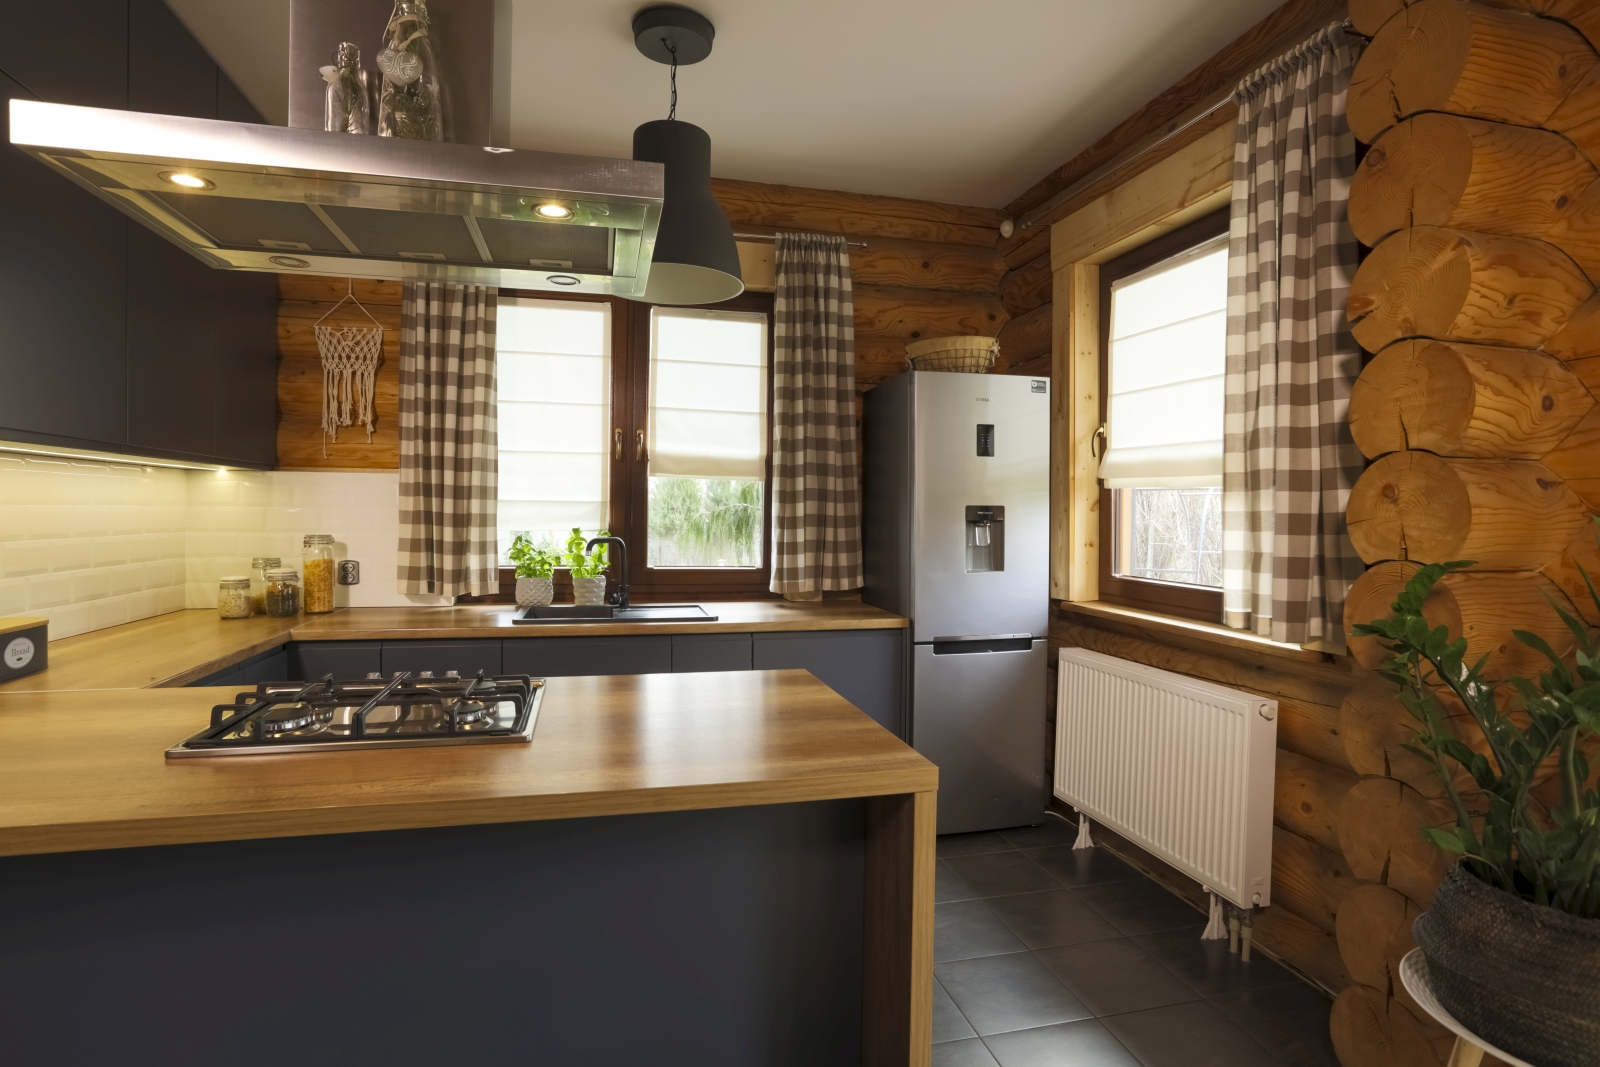 Roman blinds and curtains